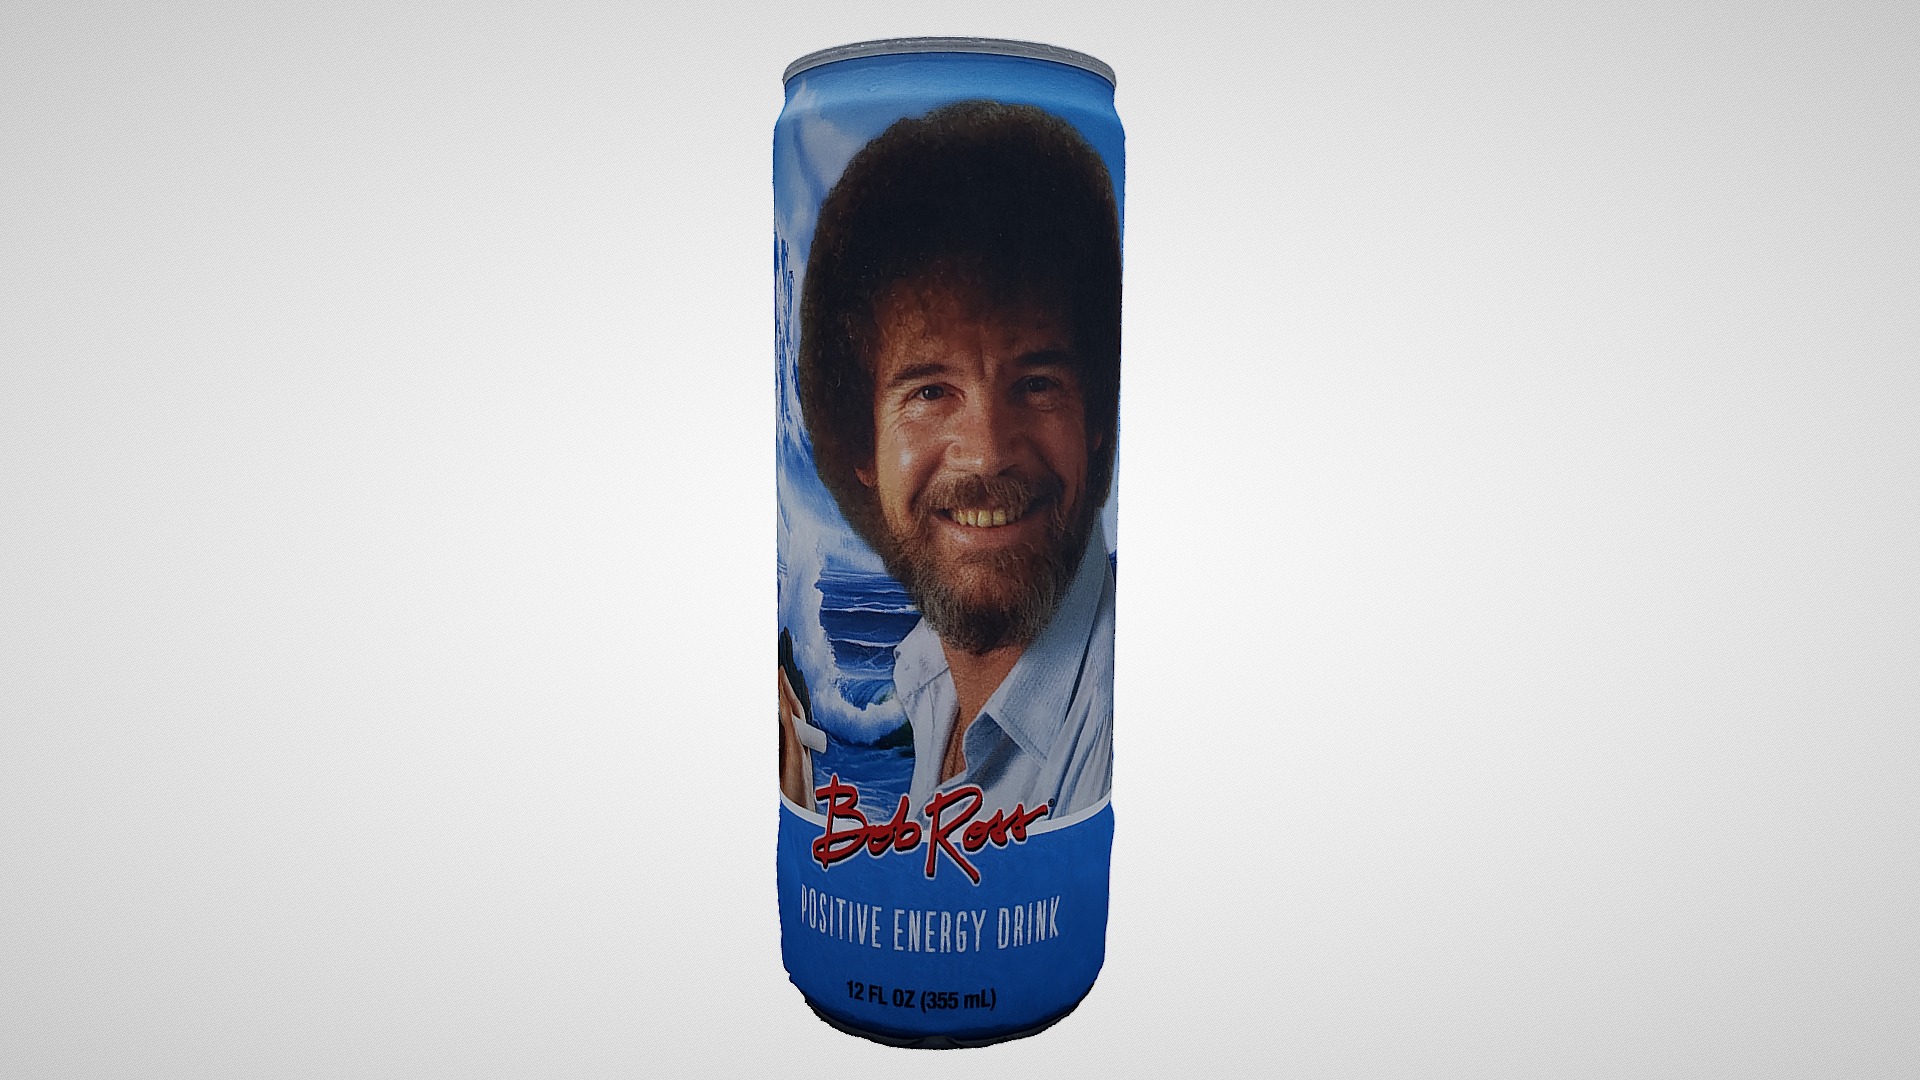 3D model Bob Ross POSITIVE ENERGY DRINK - This is a 3D model of the Bob Ross POSITIVE ENERGY DRINK. The 3D model is about a man's face on a package.